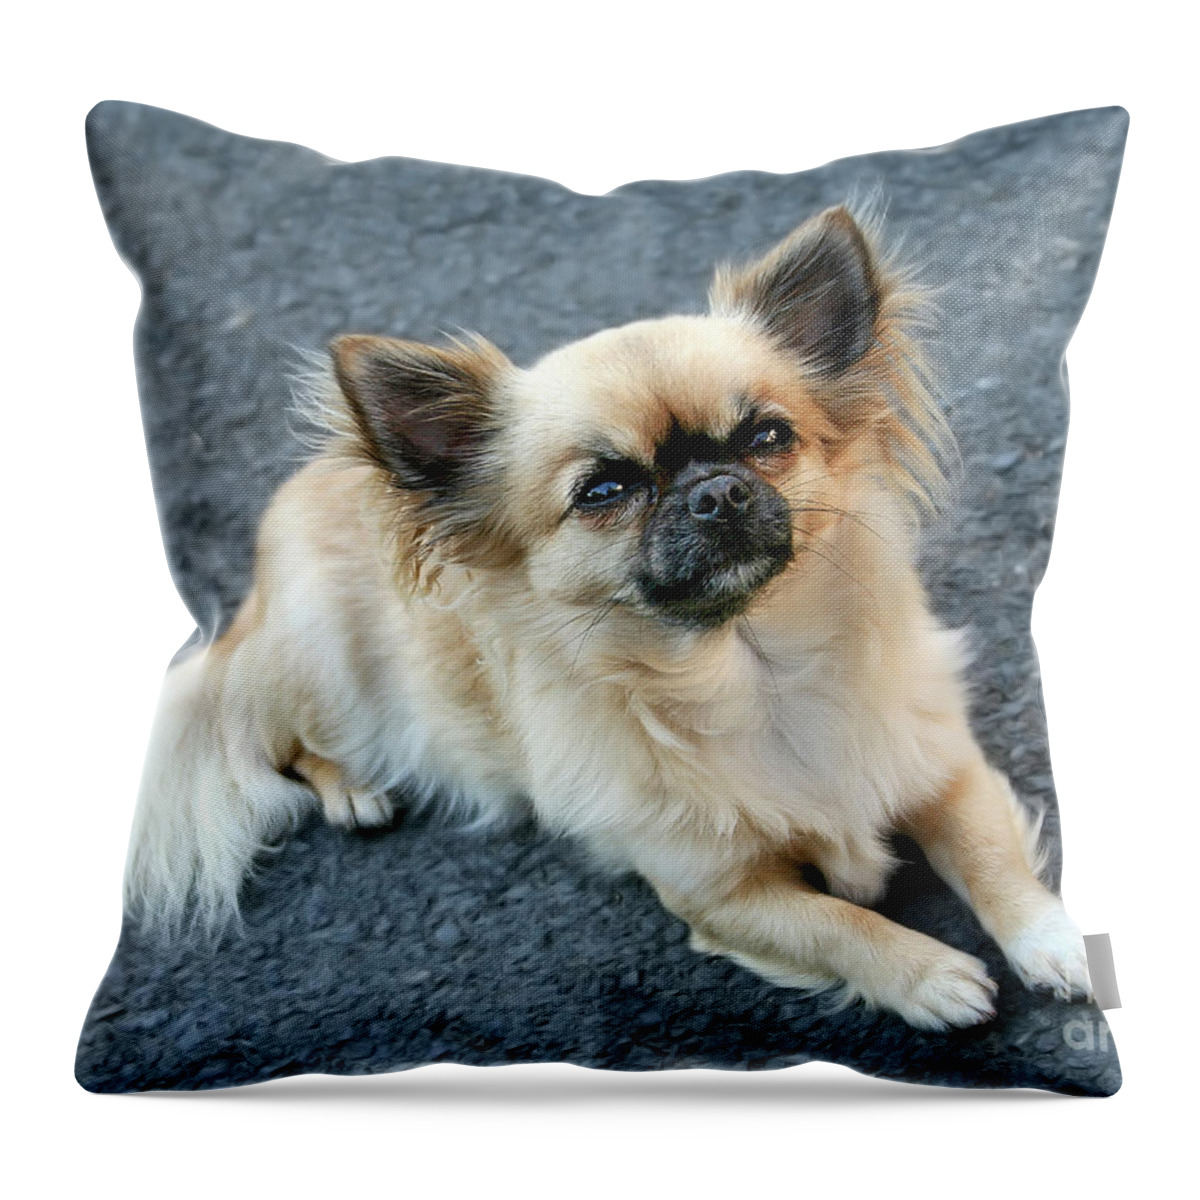 Chihuahua Small Smallest Dog Lovely Character Beauty Beautiful Pet Animal Delightful Pastel Colours Wait Waiting Patiently Sitting Face Ears Eyes Nose Tail Four Legs Friend Look  Throw Pillow featuring the photograph Faithful Look, Chihuahua by Tatiana Bogracheva